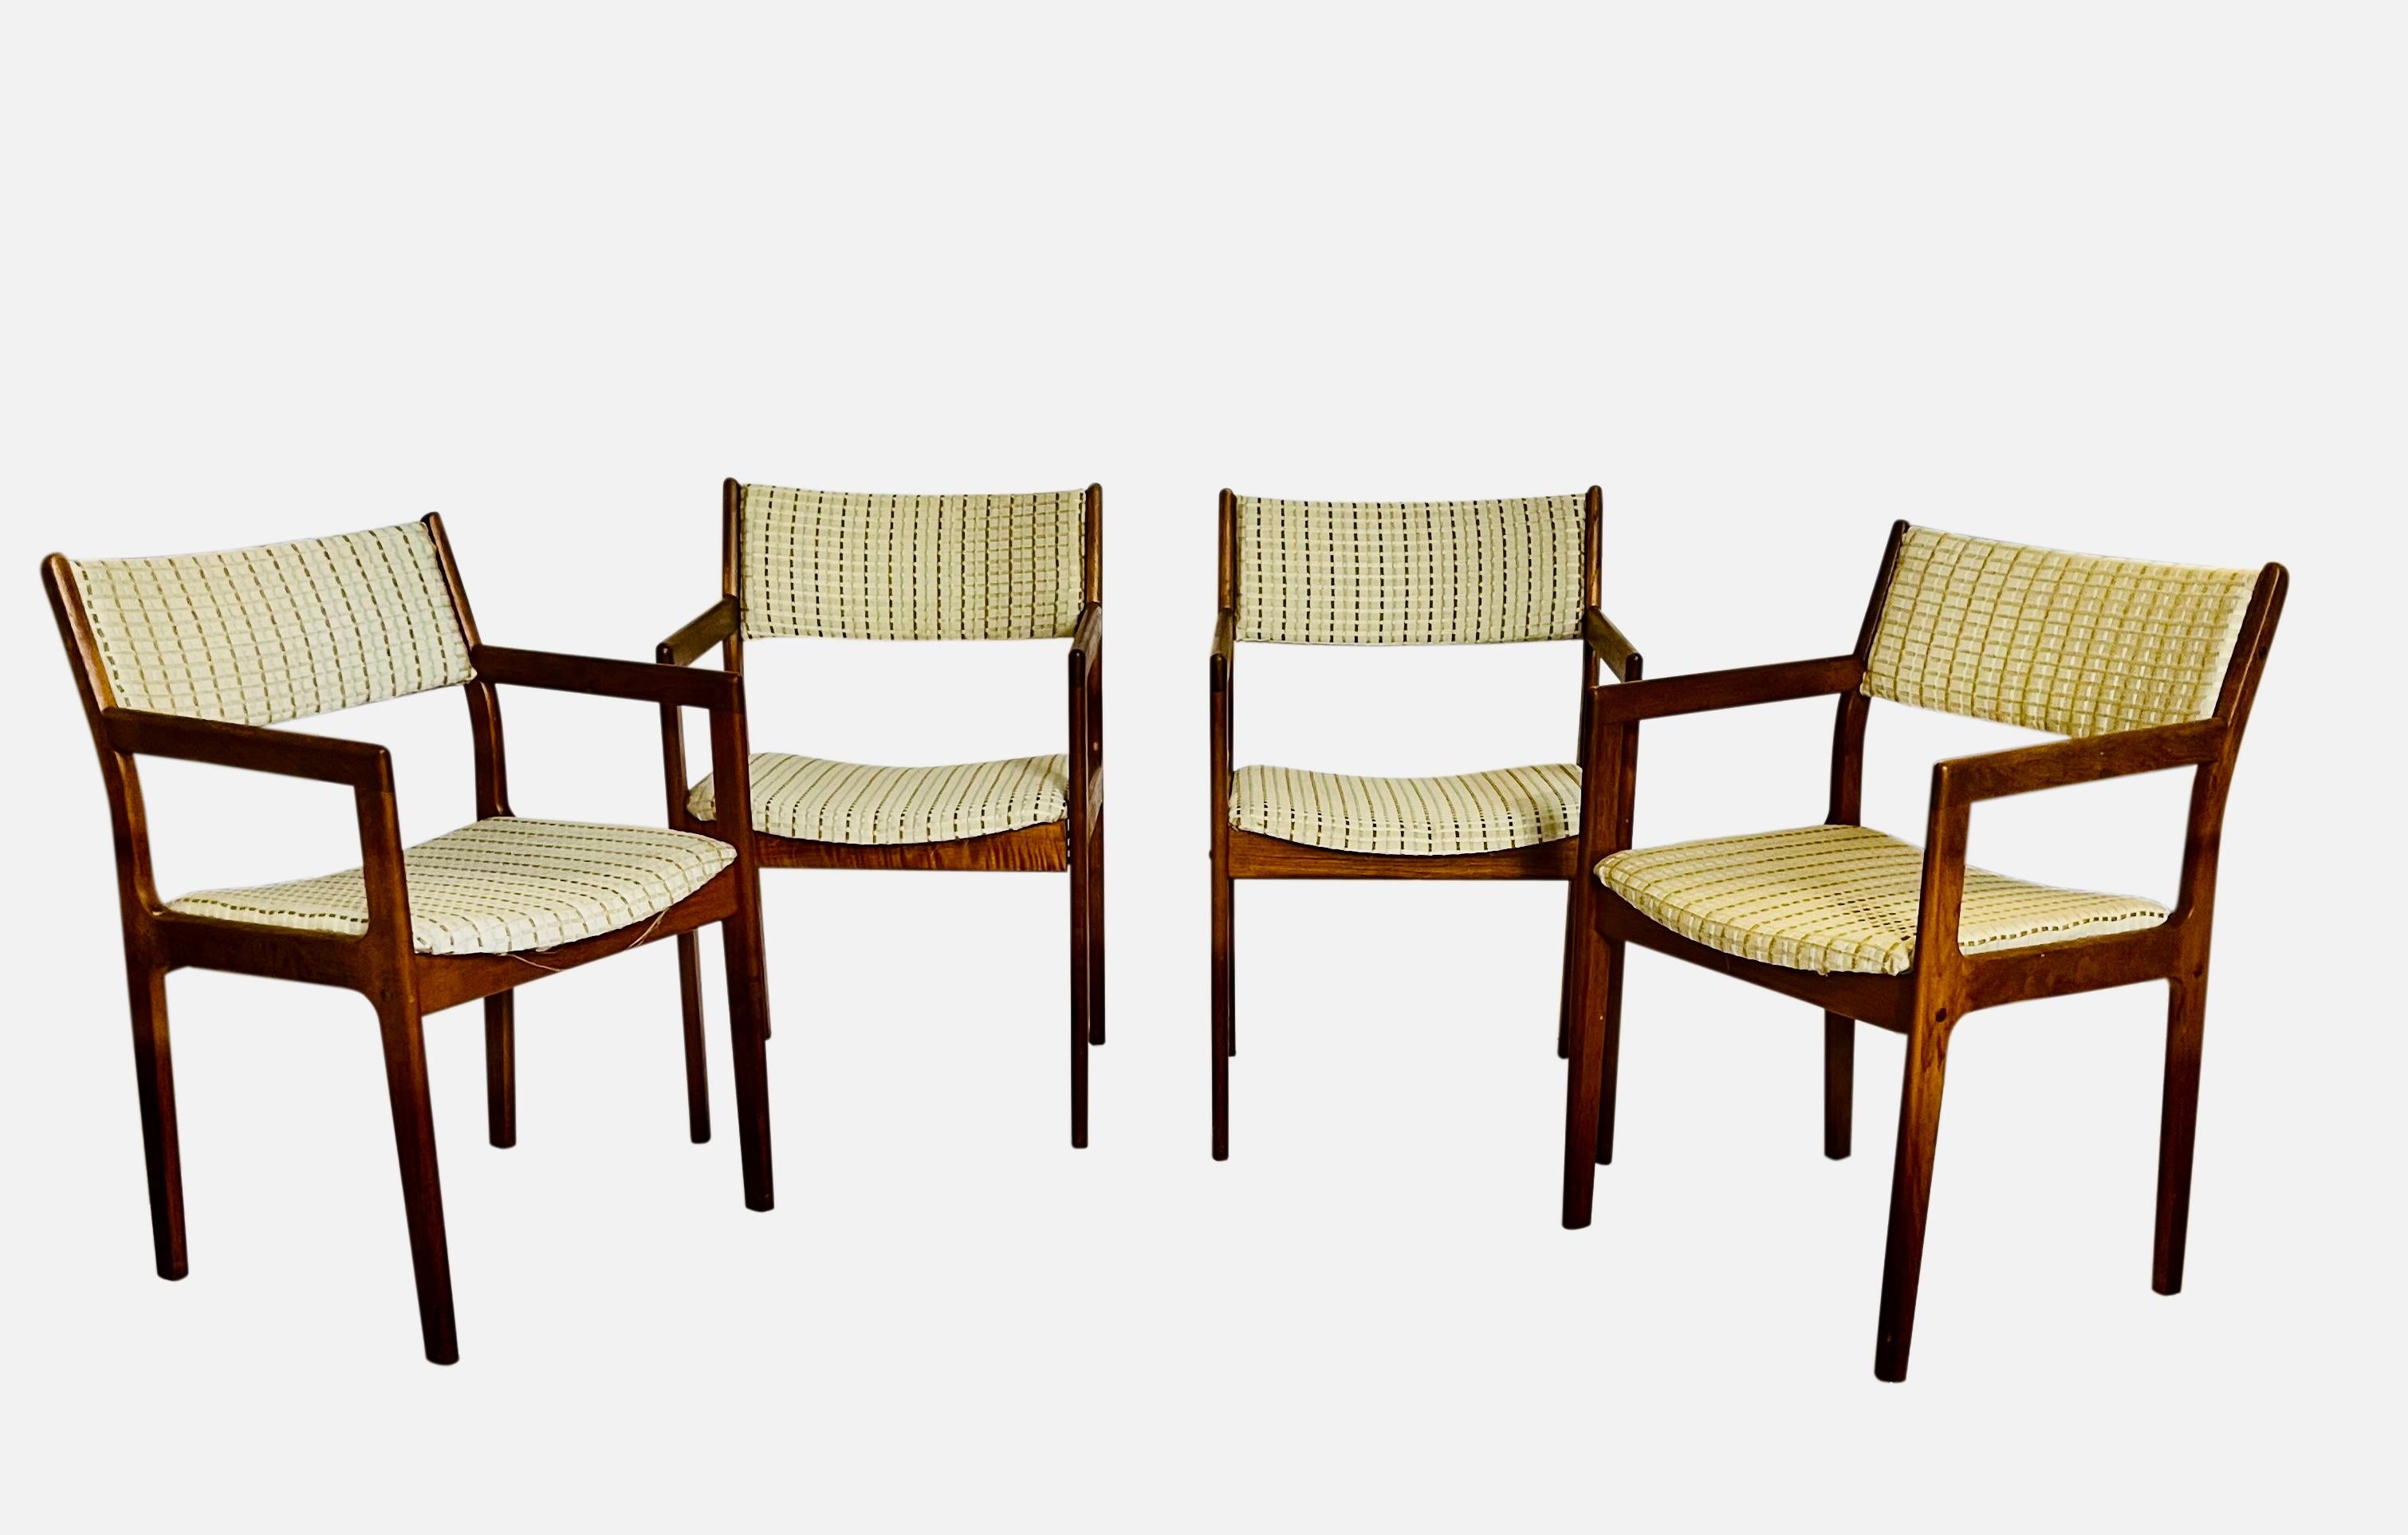 Set of four midcentury Danish dining chairs in teak. 

All chairs feature arms which create a sleek silhouette and provide comfort. The upholstered back and seat are in a subtly textured neutral with cream, ice blue and olive brown. Fabric is in